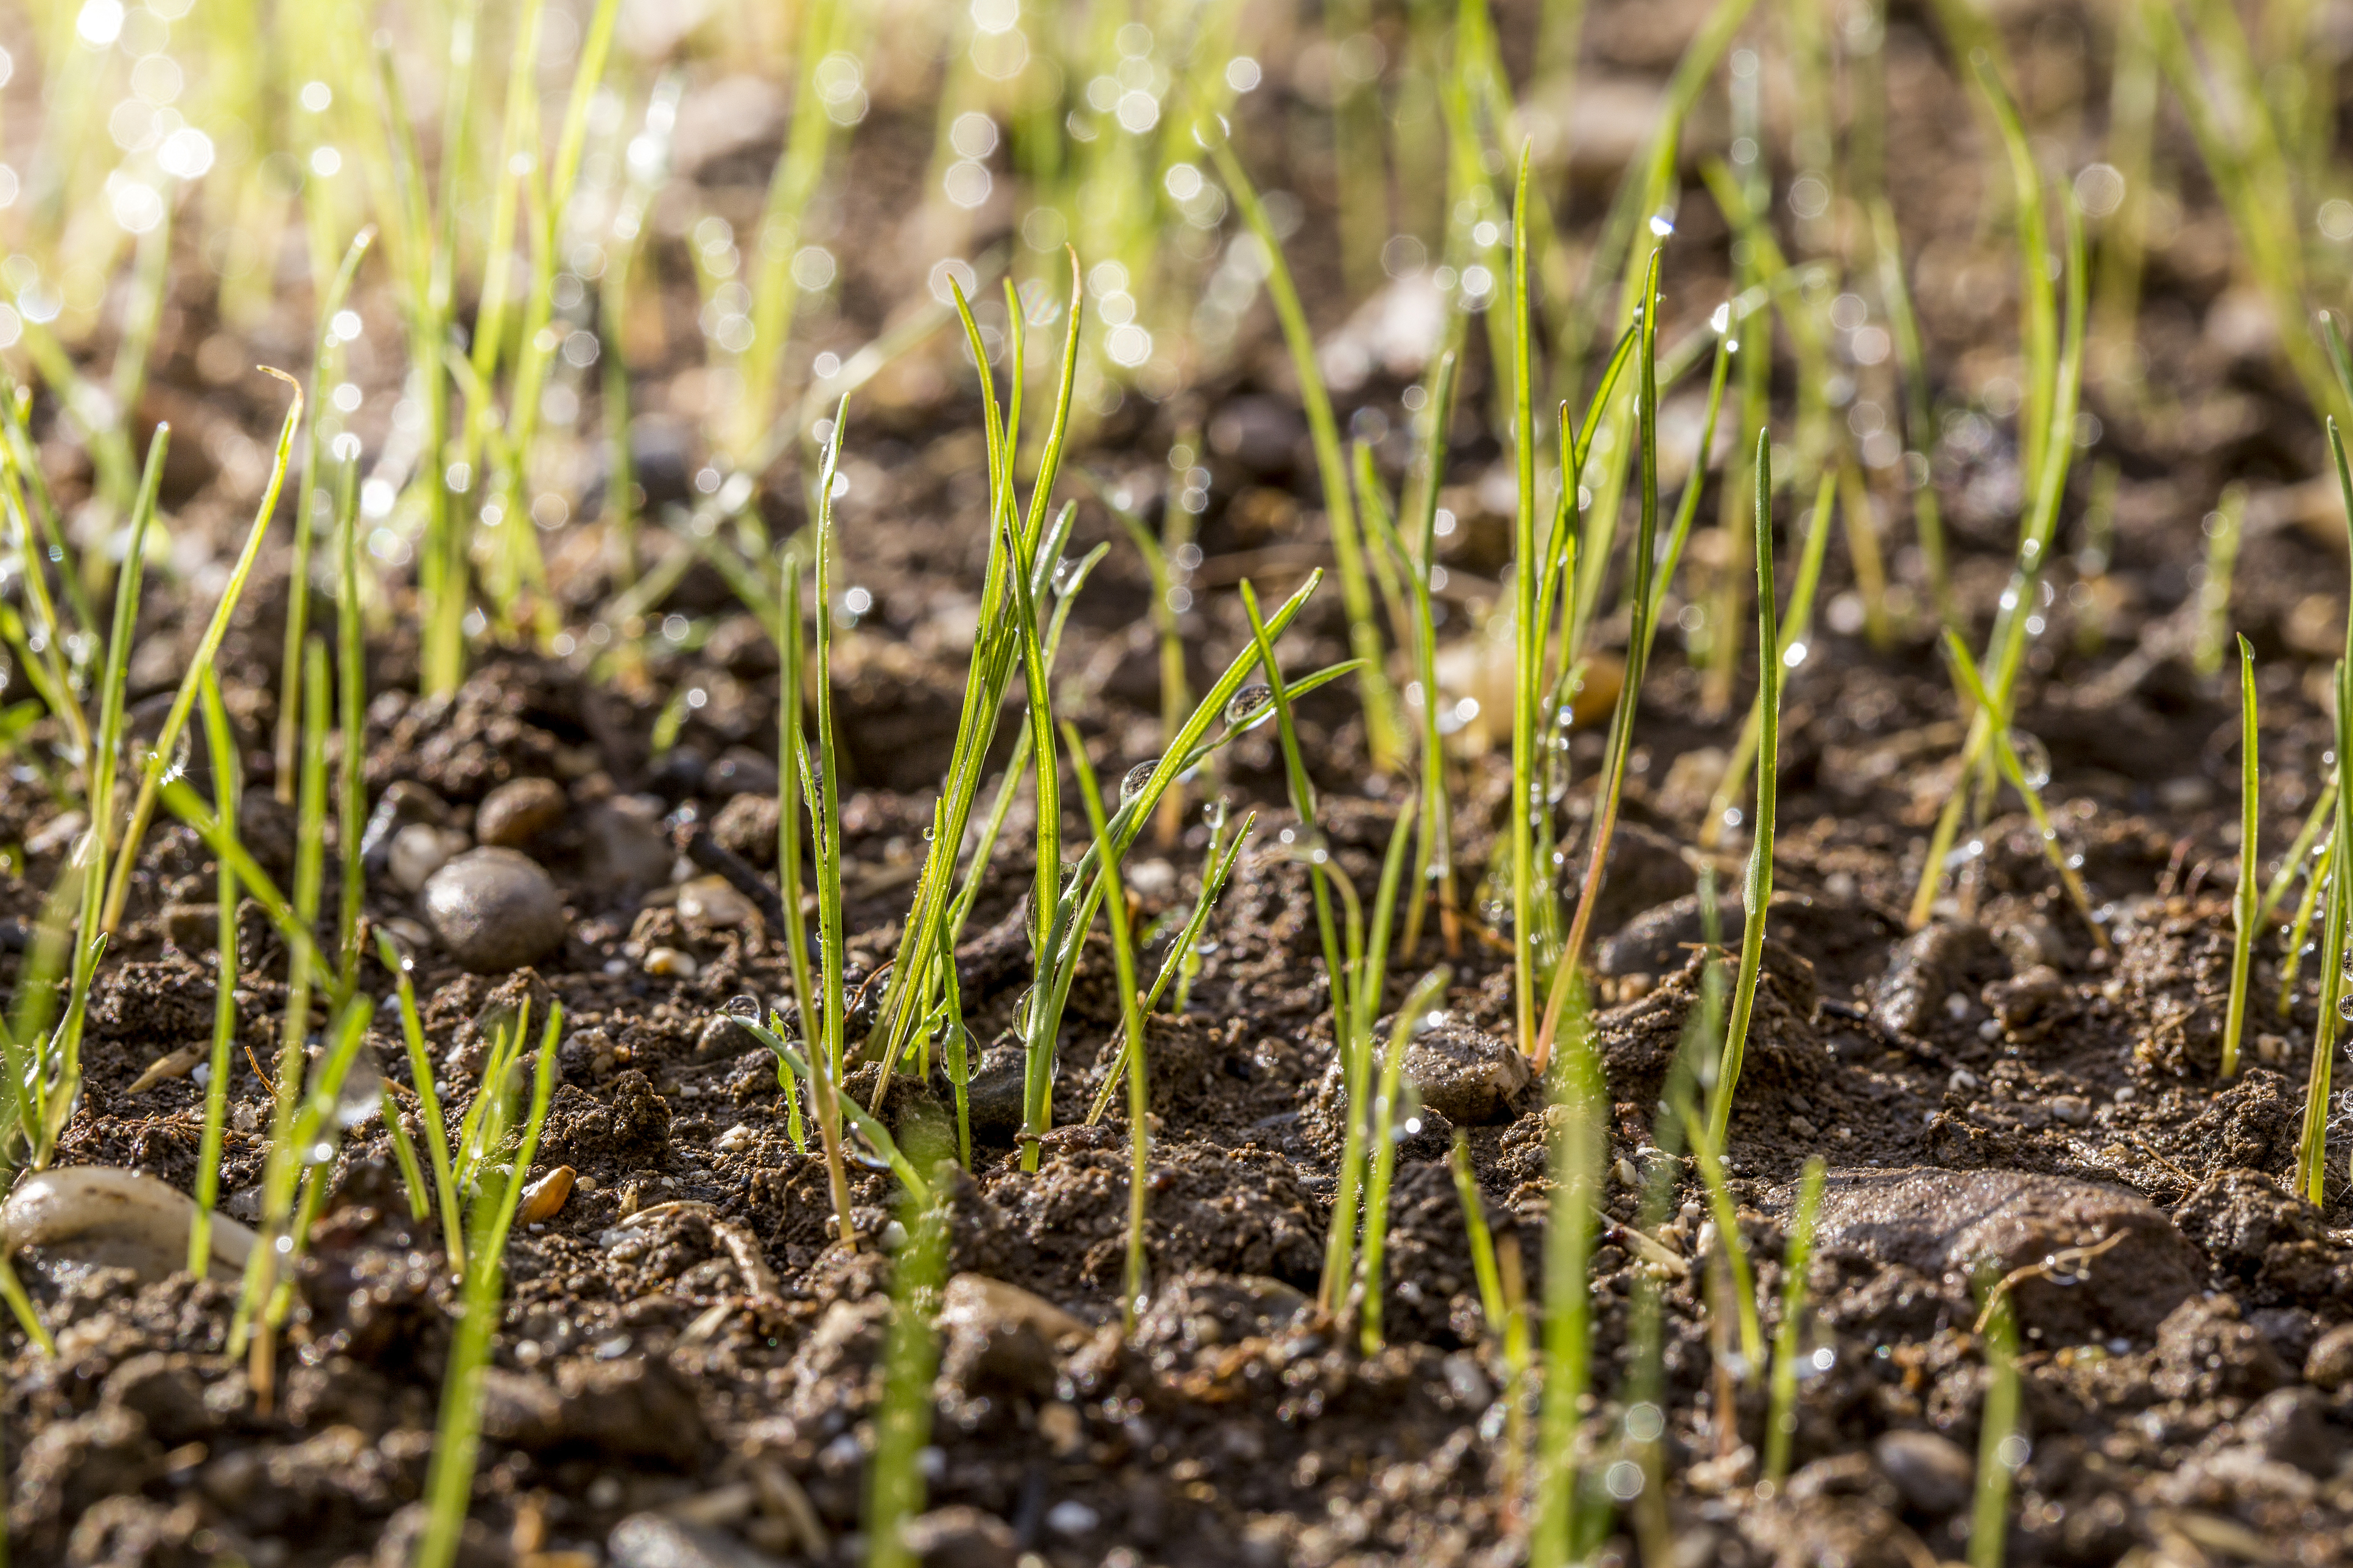 If you re-seed bare patches, they will soon look better. (Thinkstock/PA)